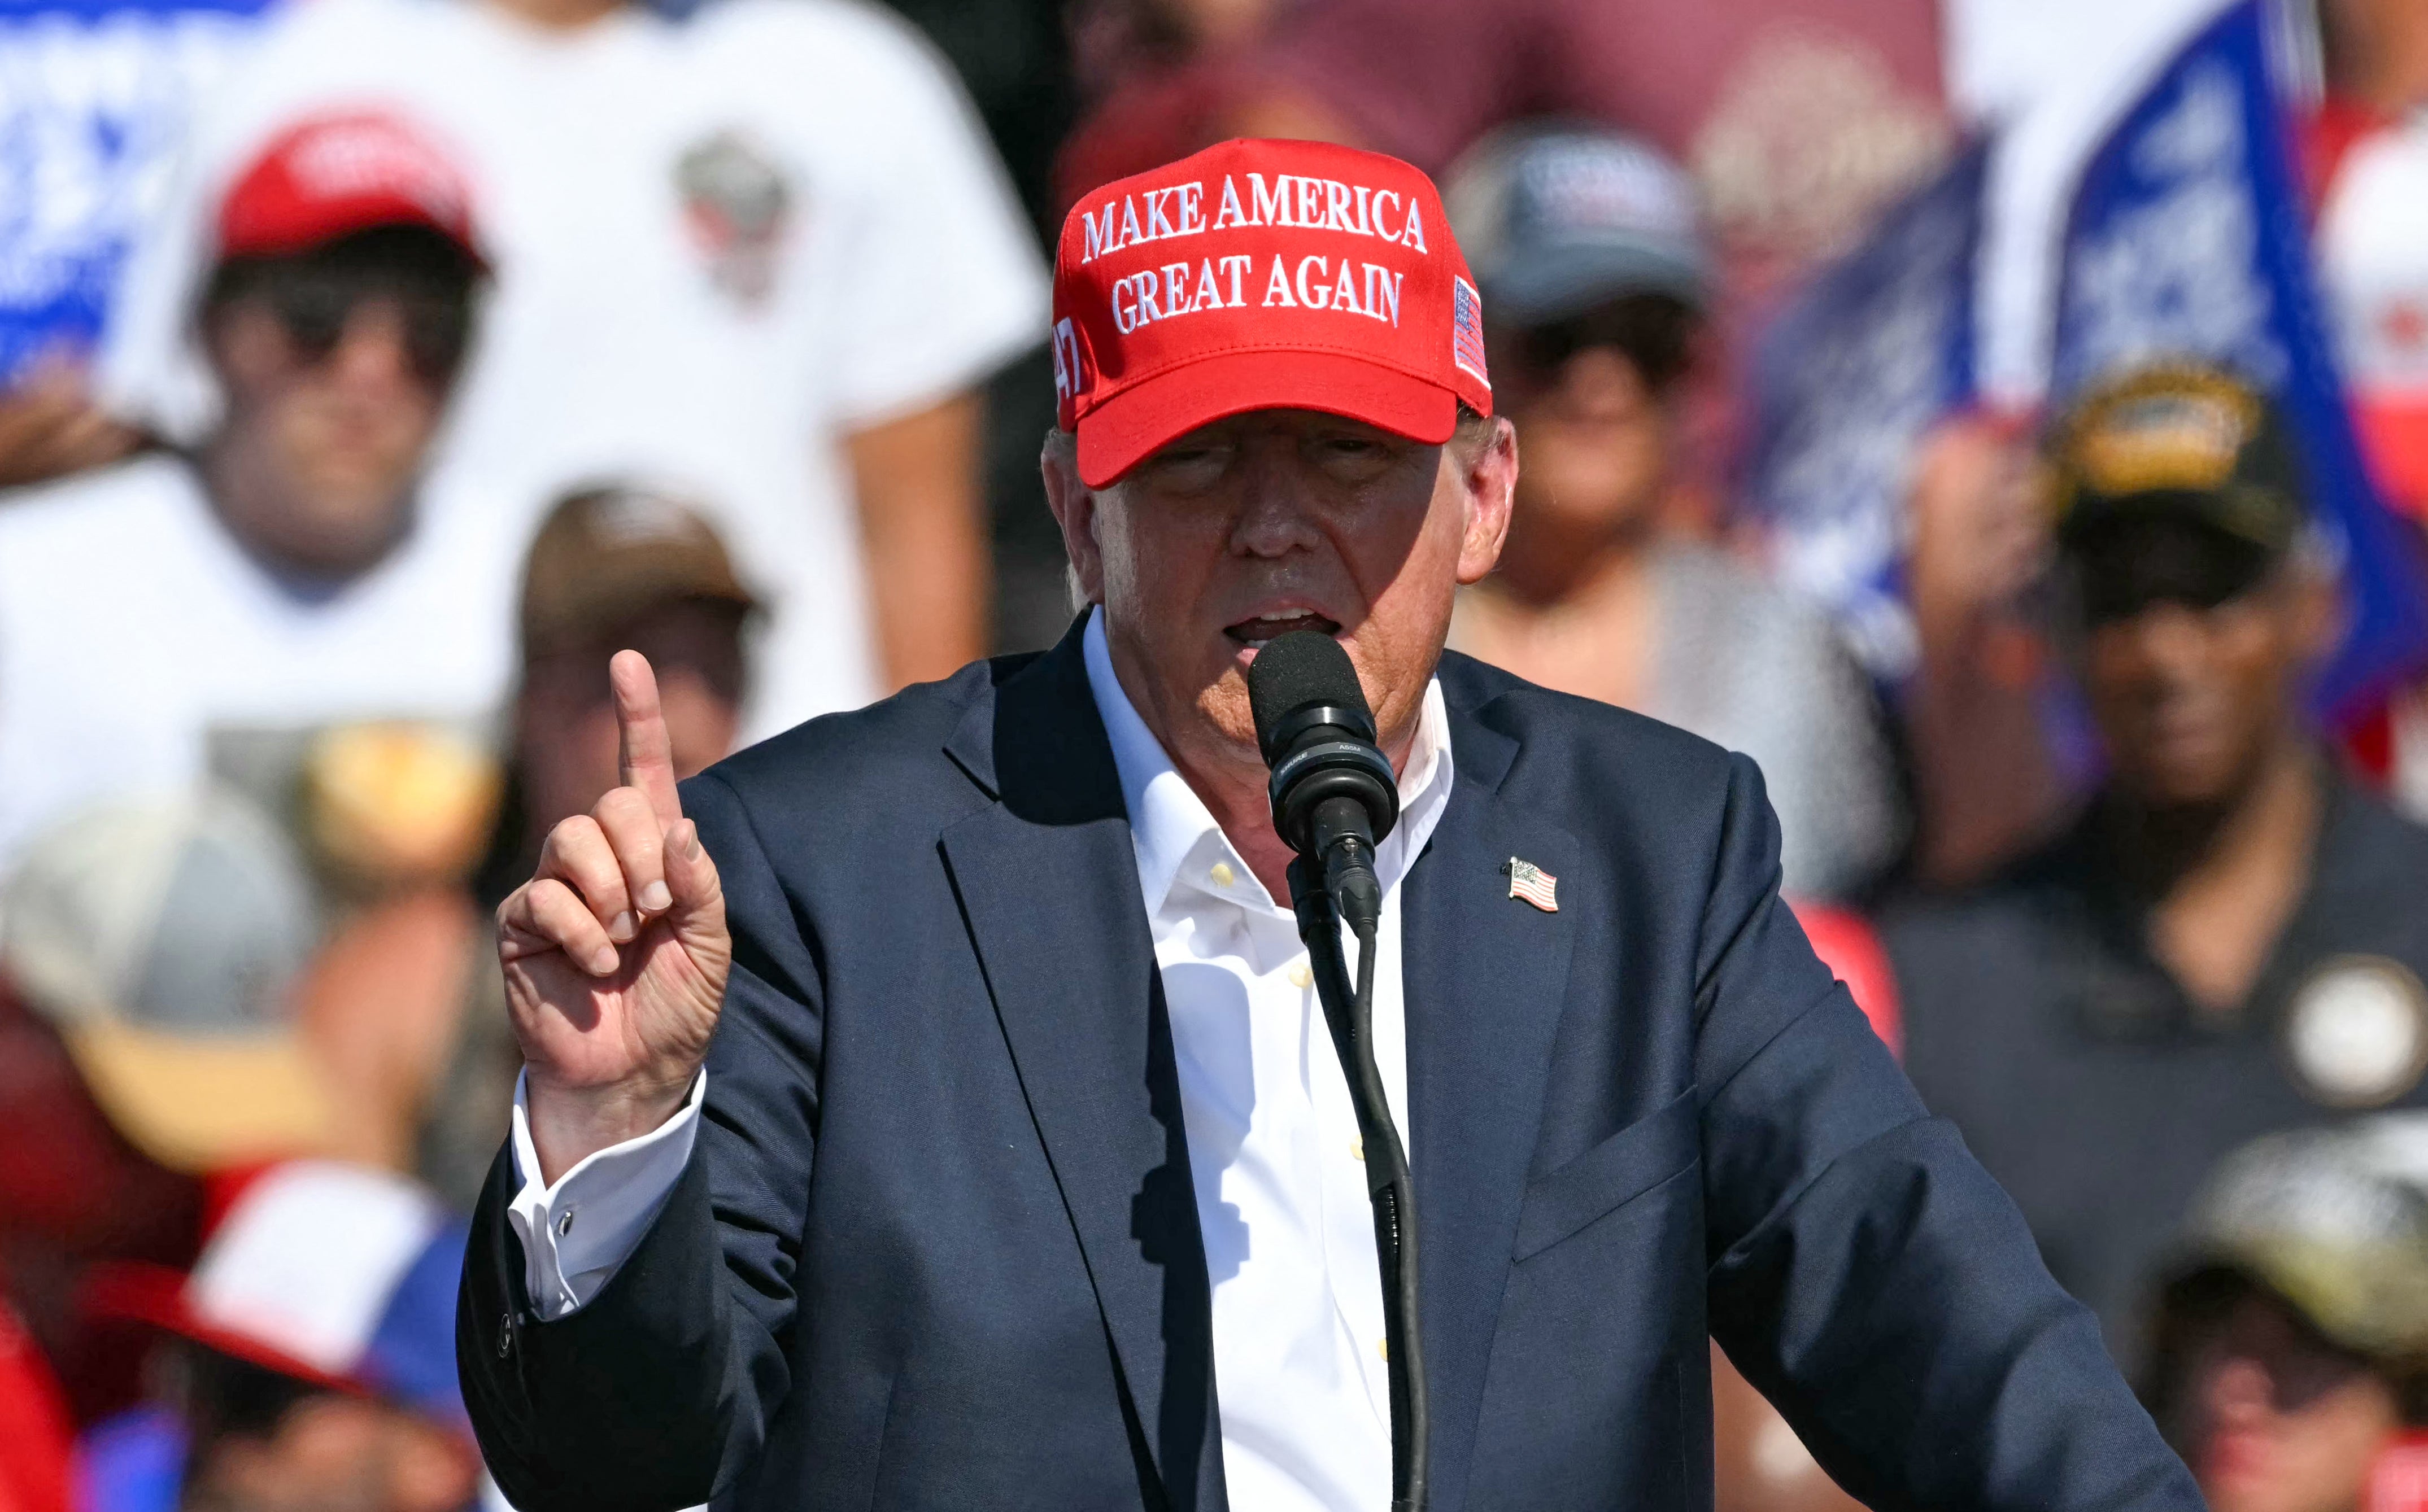 Donald Trump speaks to supporters in Chesapeake, Virginia on June 28 where he took a victory lap following his debate performance against Joe Biden on Thursday night